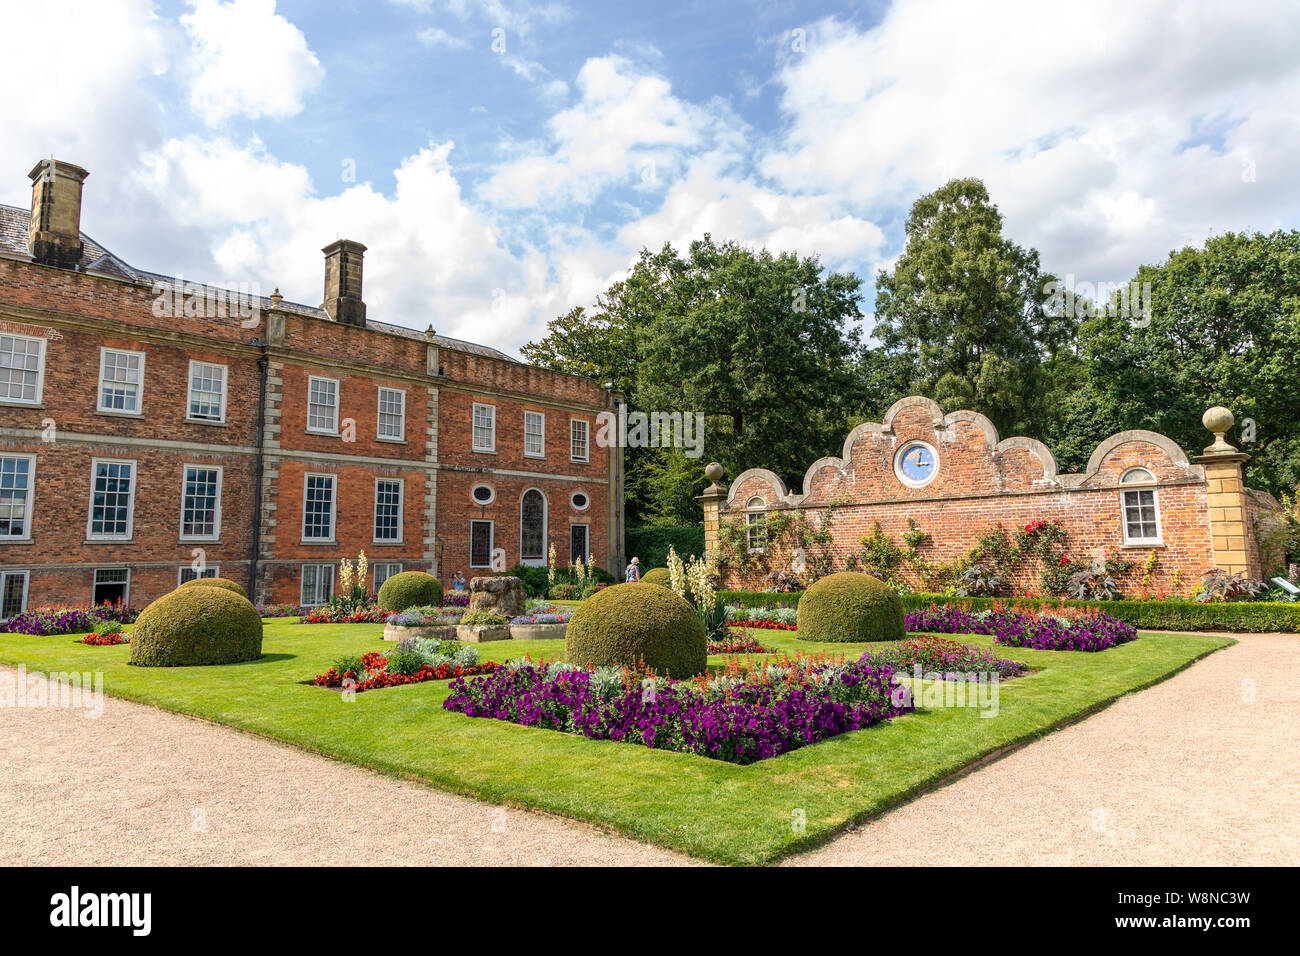 Erddig Hall an historic 17th century mansion in the midst of survived 18 century gardens and parkland in Shropshire is one of the most stately homes. Stock Photo